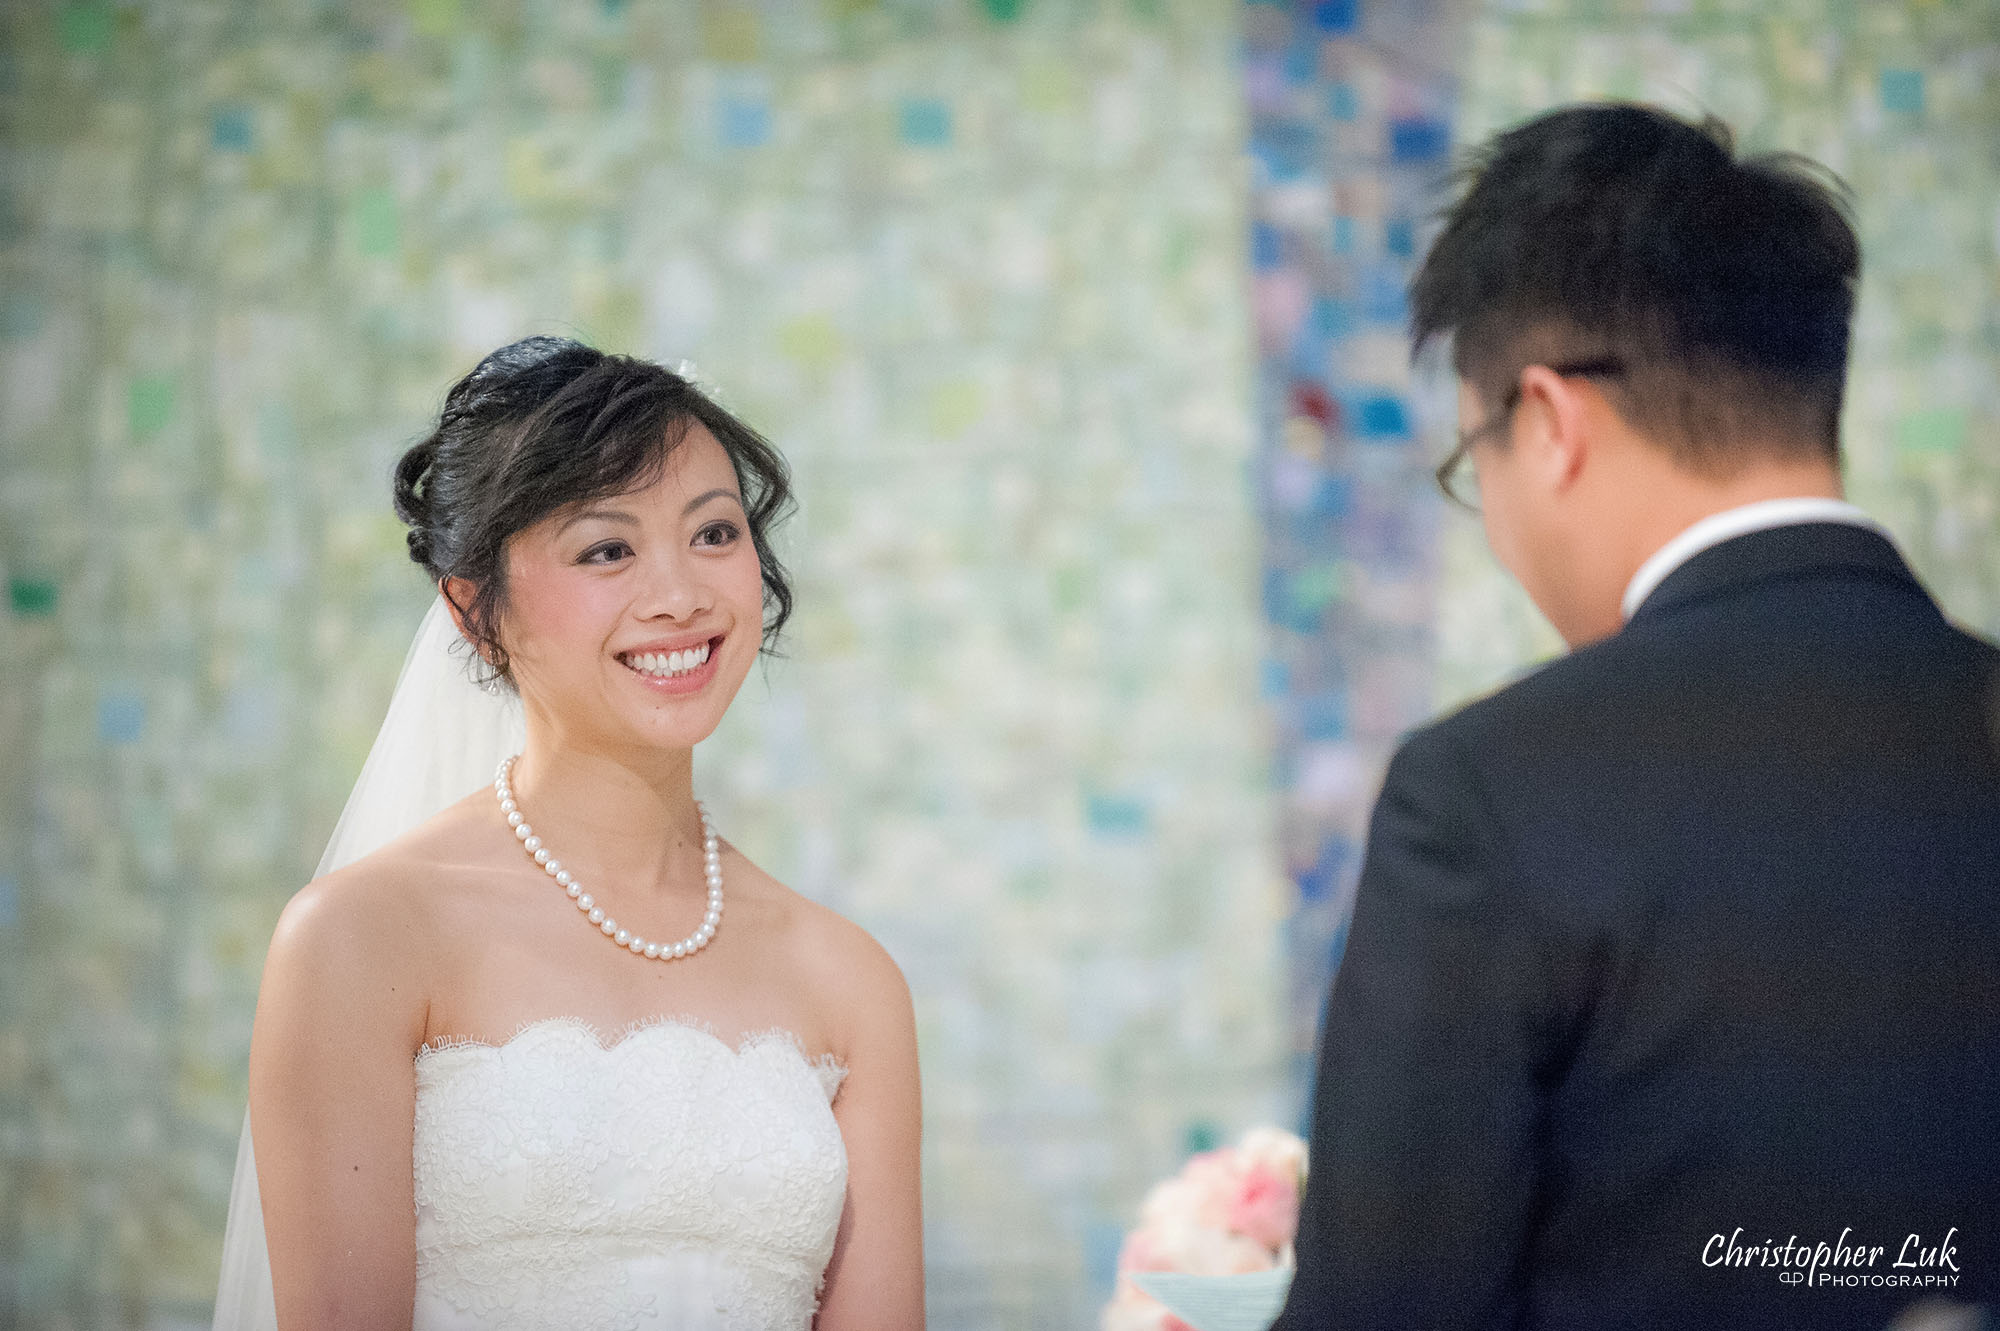 Christopher Luk Toronto Wedding Photography Tyndale Chapel Church Ceremony Venue Location Bride Groom Altar Vows Together